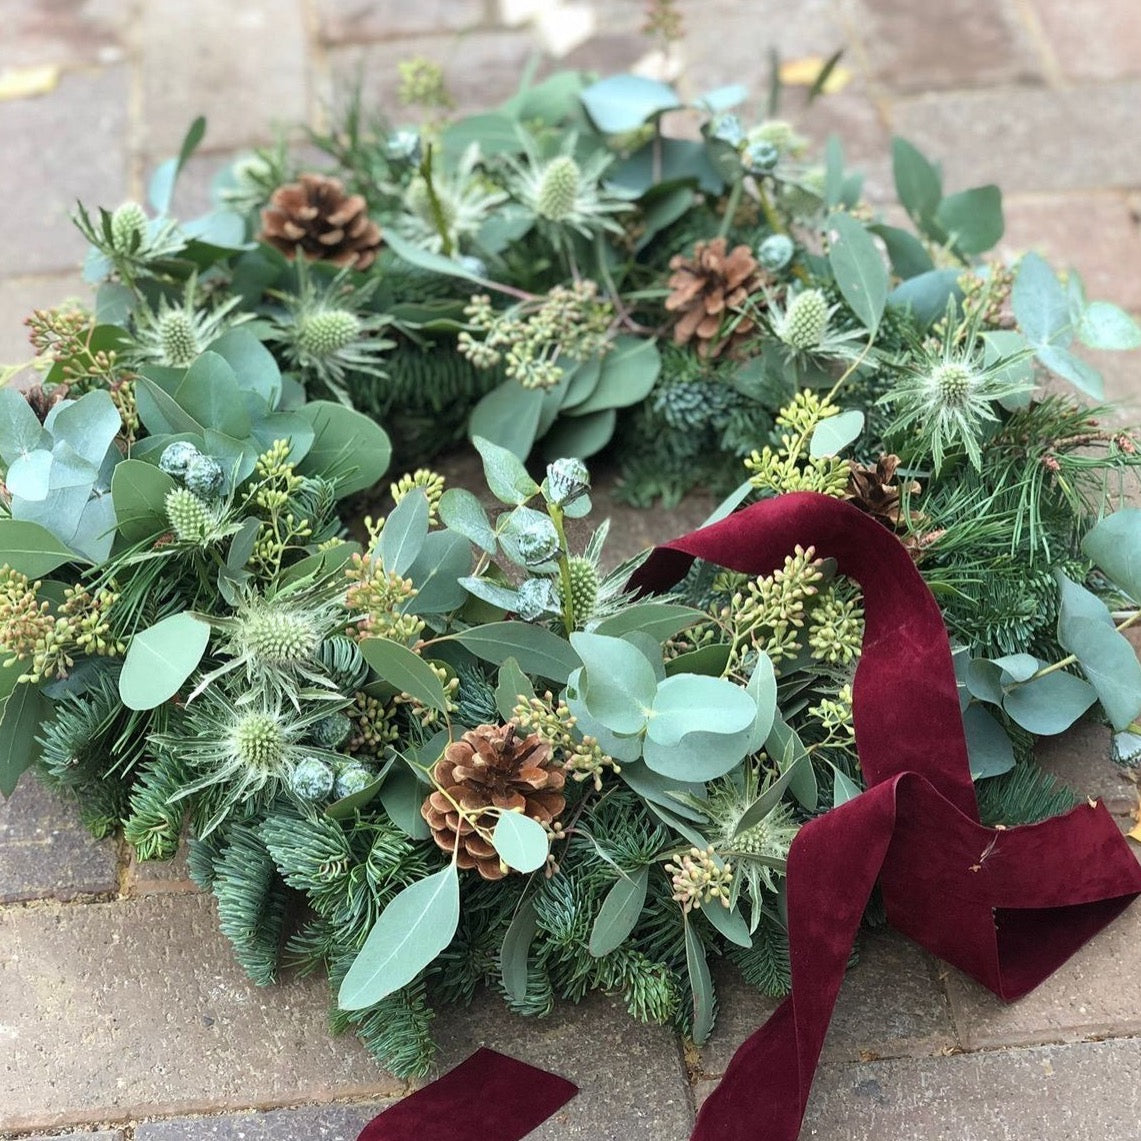 Christmas Wreath Making Workshop - Monday 4th December 2023 6.30 - 8.00pm